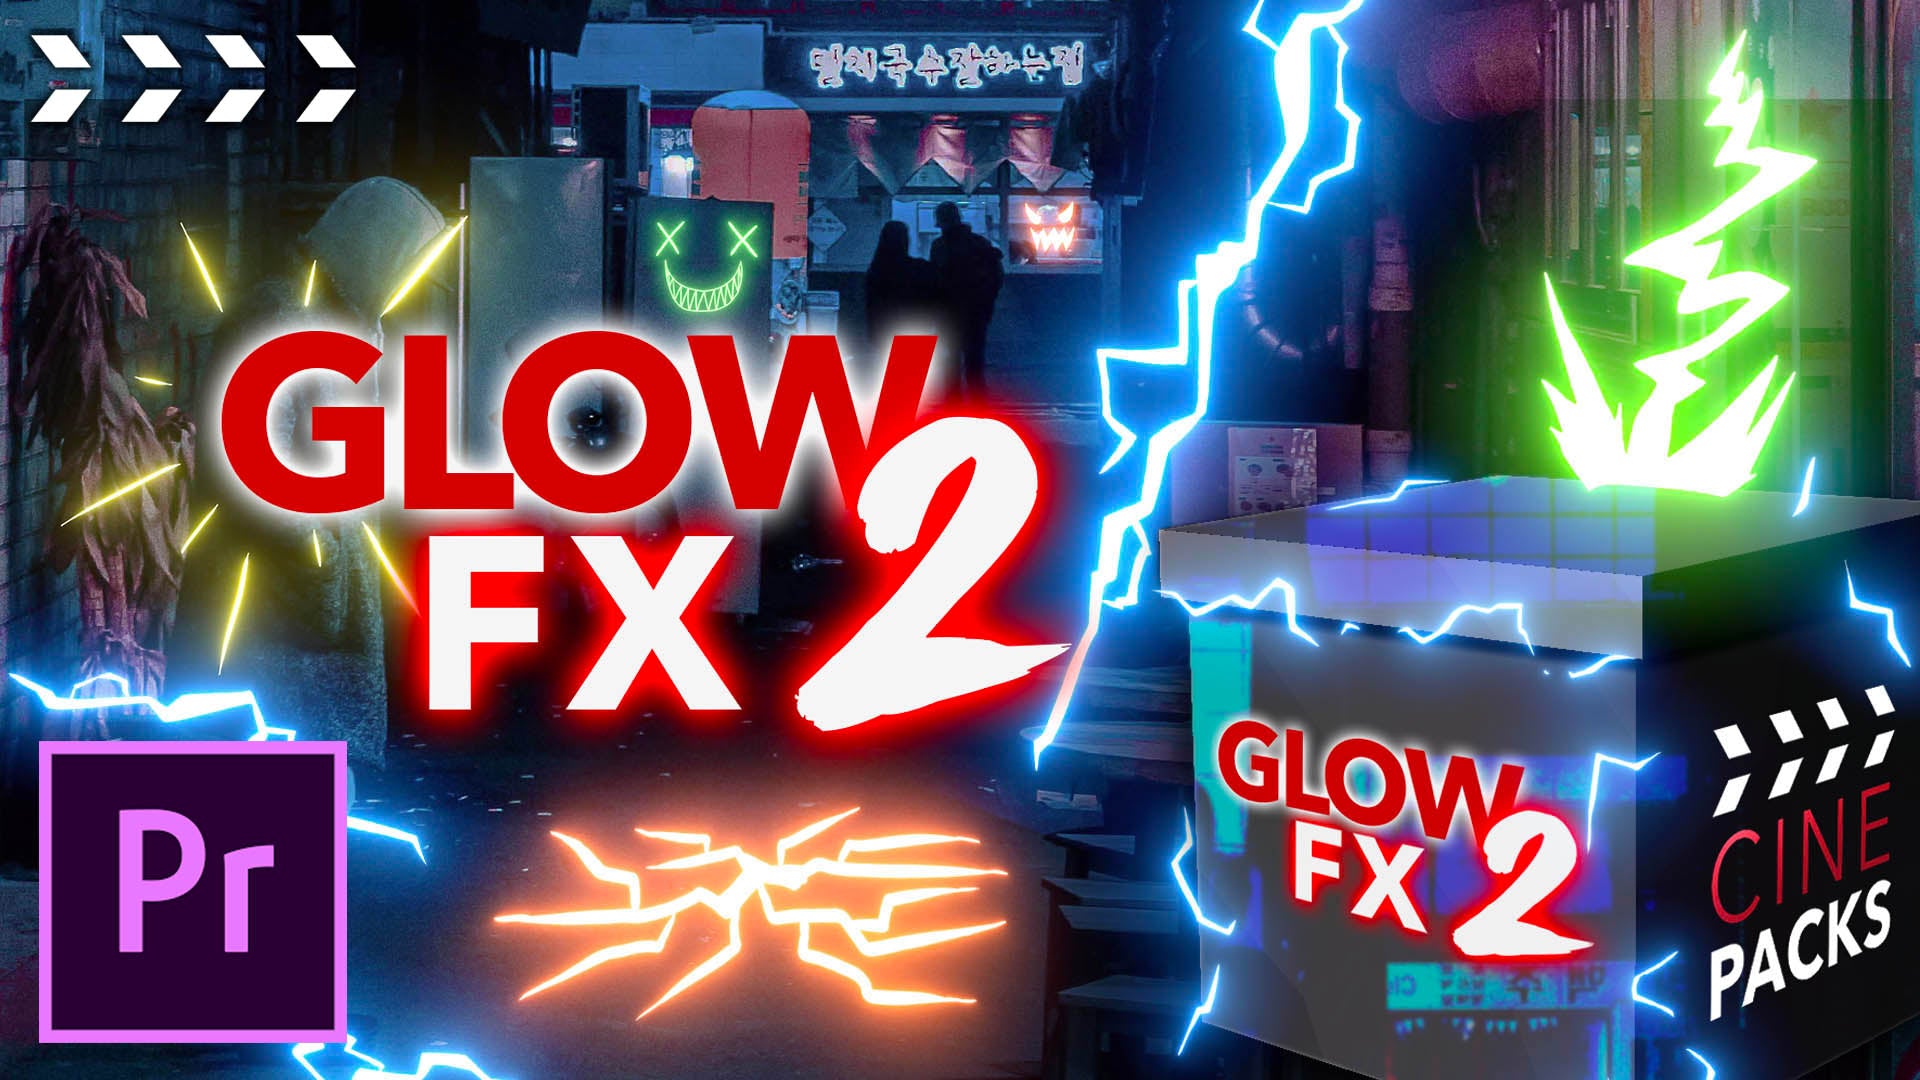 Create Incredible Glow Animation with Glow FX 2 in Adobe Premiere Pro